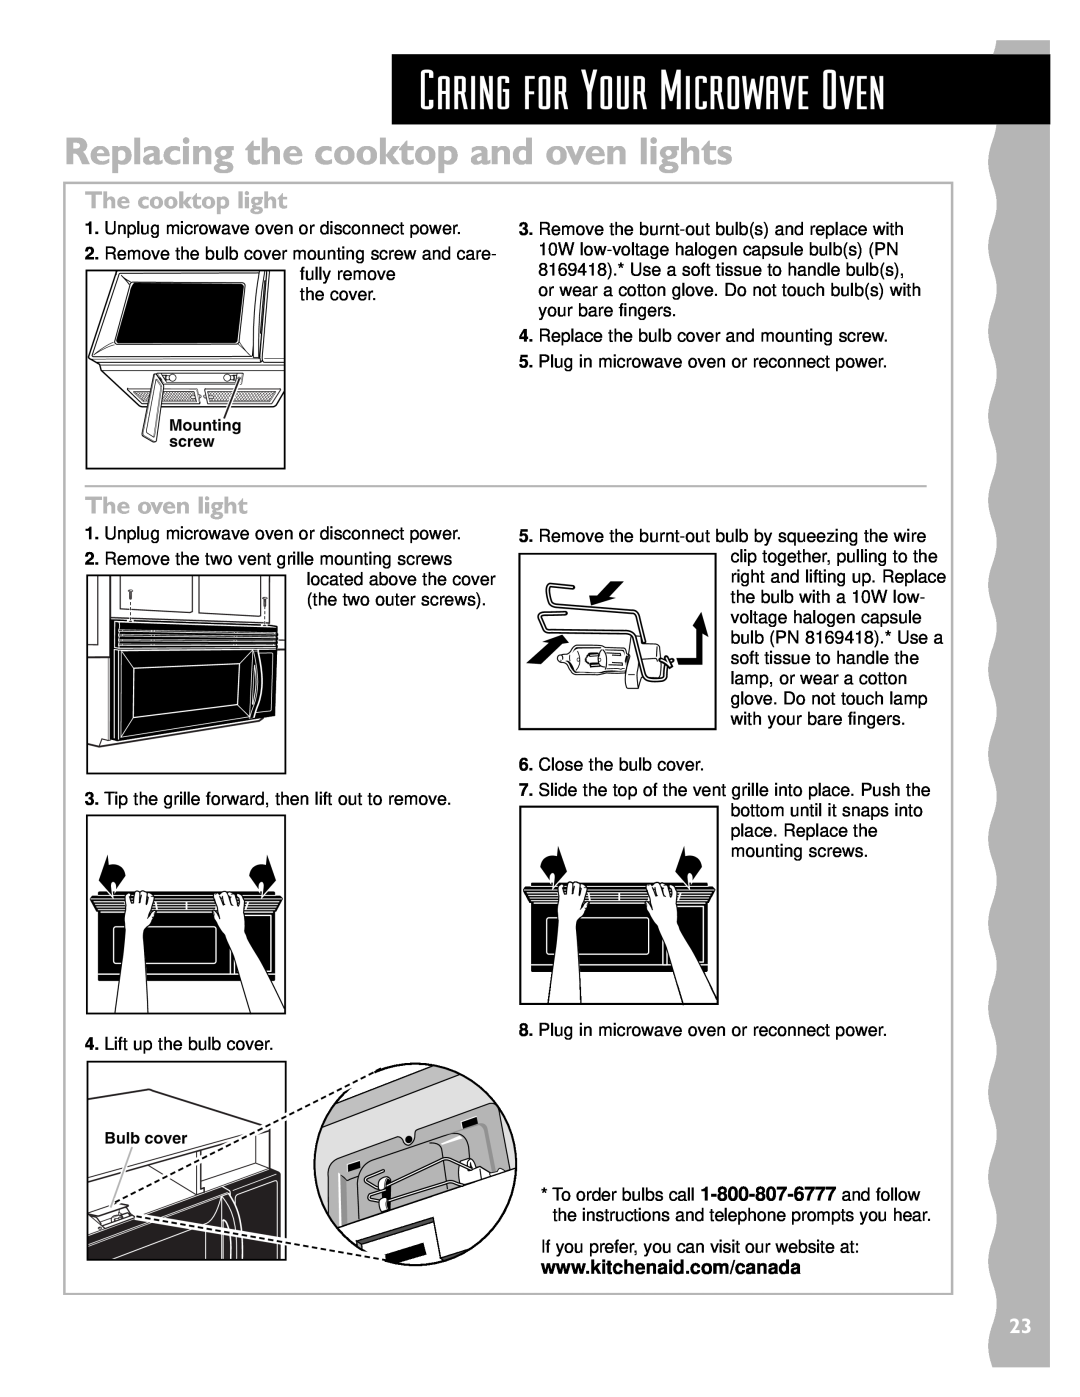 Whirlpool YKHMS147H installation instructions Replacing the cooktop and oven lights, The cooktop light, The oven light 